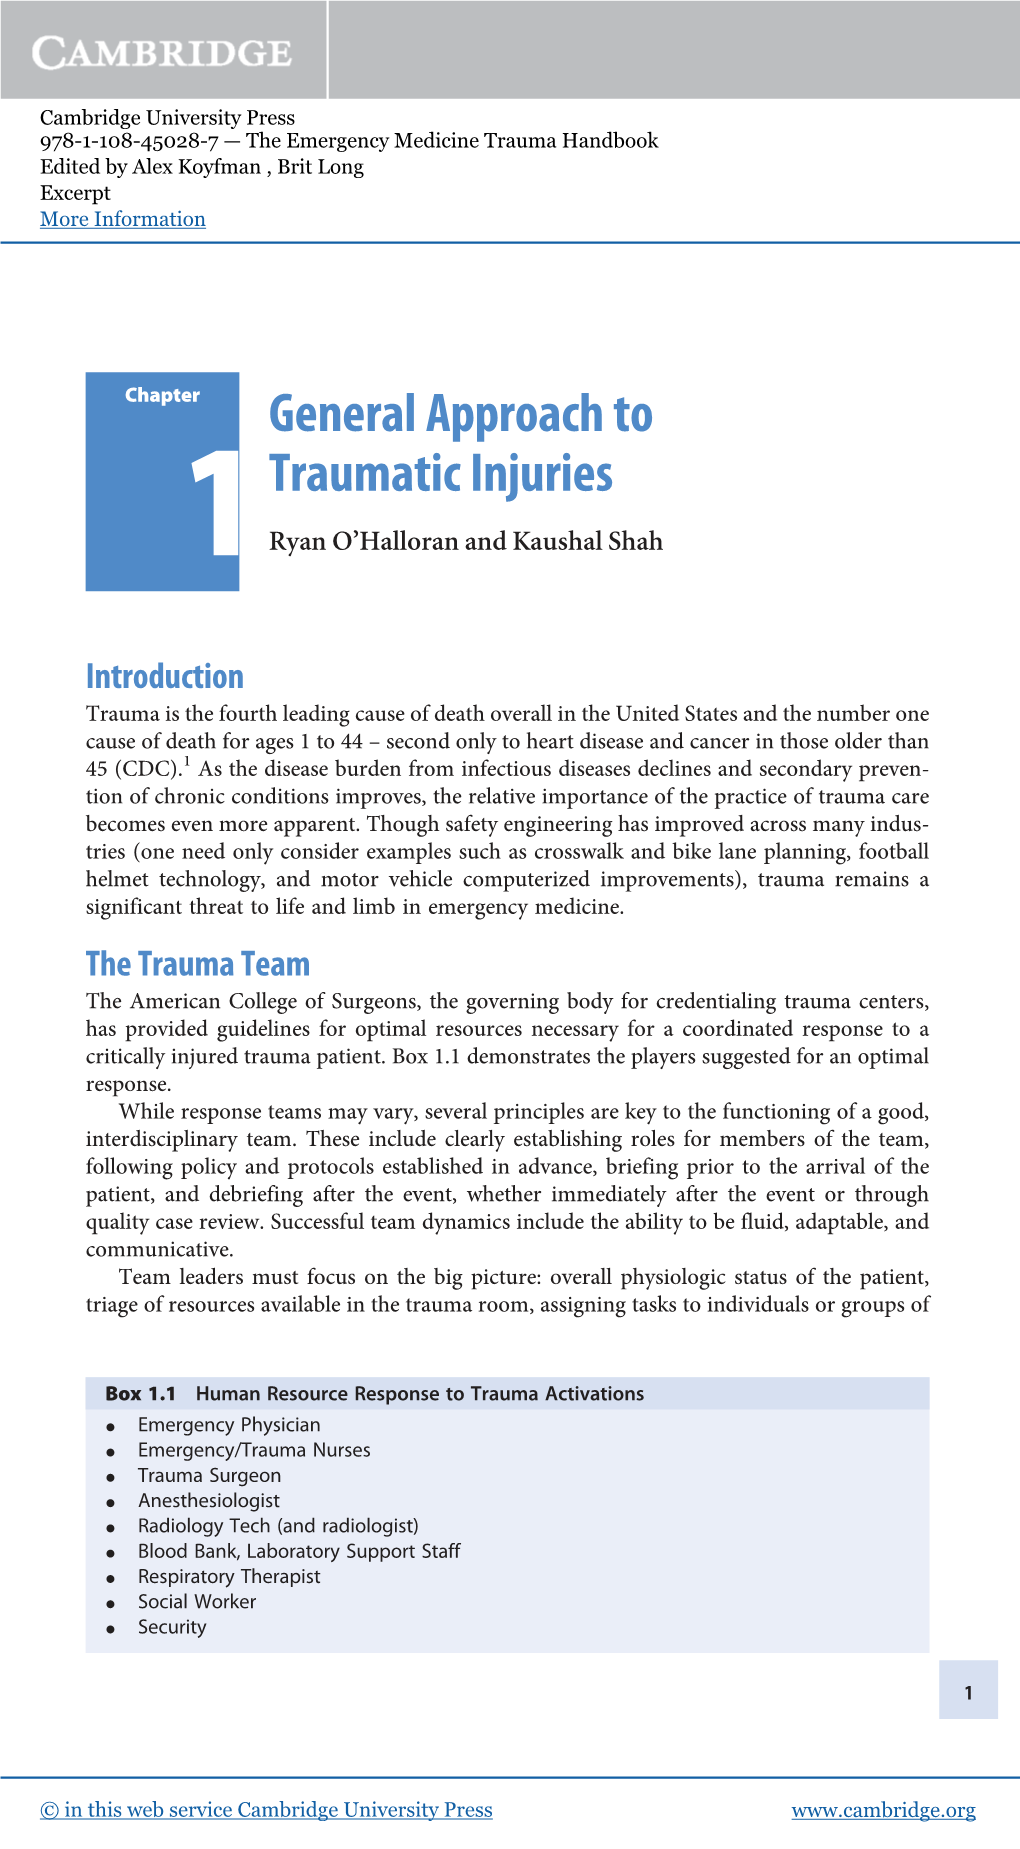 General Approach to Traumatic Injuries